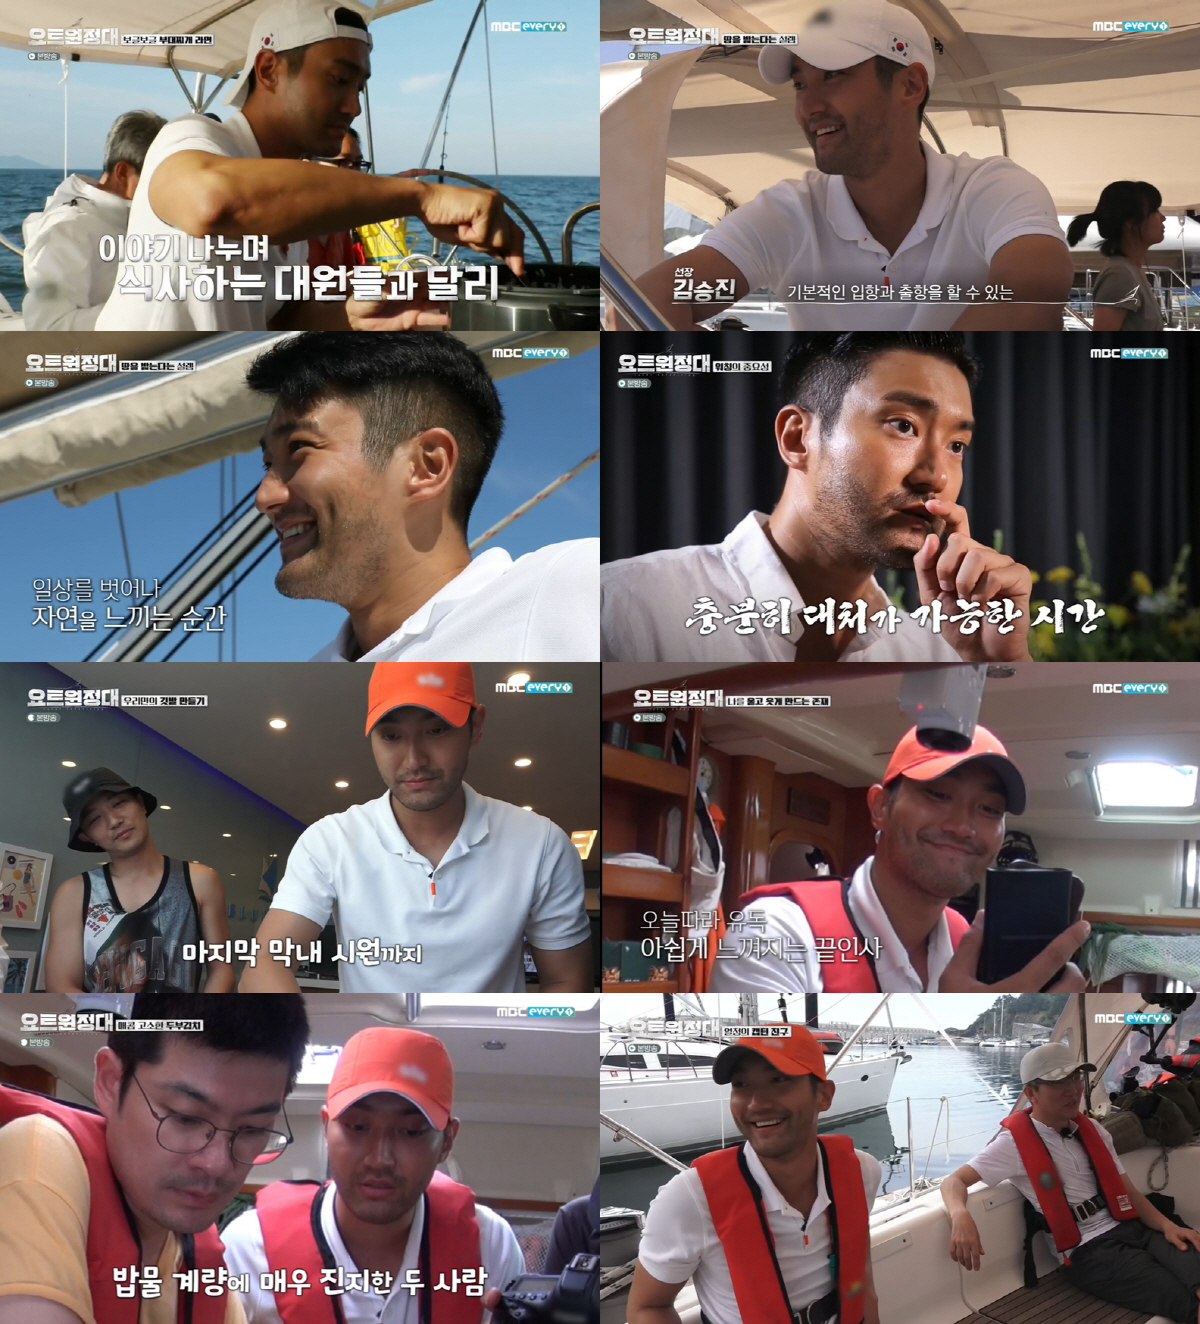 Choi Siwon is receiving a response to MBC Everlon yacht Expedition, a documentary entertainment program about the process of challenging Pacific Ocean sailing on yacht, with Jingu, Jang Ha, Song Ho Jun, Kim Seung Jin and Im Soo Bin.On the 31st broadcast, Choi Siwon was taught the process of learning true navigation through unpredictable various events on the yacht heading to Jeju Island.Choi Siwon showed a special sense of responsibility with his willingness to do his part even in the midst of seasickness, as well as calmly seeing the captain after discovering the fishing boat, and quickly making the audience sweat by avoiding the crisis situation with quick judgment.In addition, Choi Siwon volunteered to help the long-term chef, laughed at the situation drama, and showed the charm of reversal with the youngest son who was full of sense, and revitalized the tensiony yacht and made the name value as Ace member.The yacht expedition, which starts full-scale Pacific Ocean voyage and is more anticipated by Choi Siwon, is broadcast every Monday at 8:30 pm at MBC Everlon.